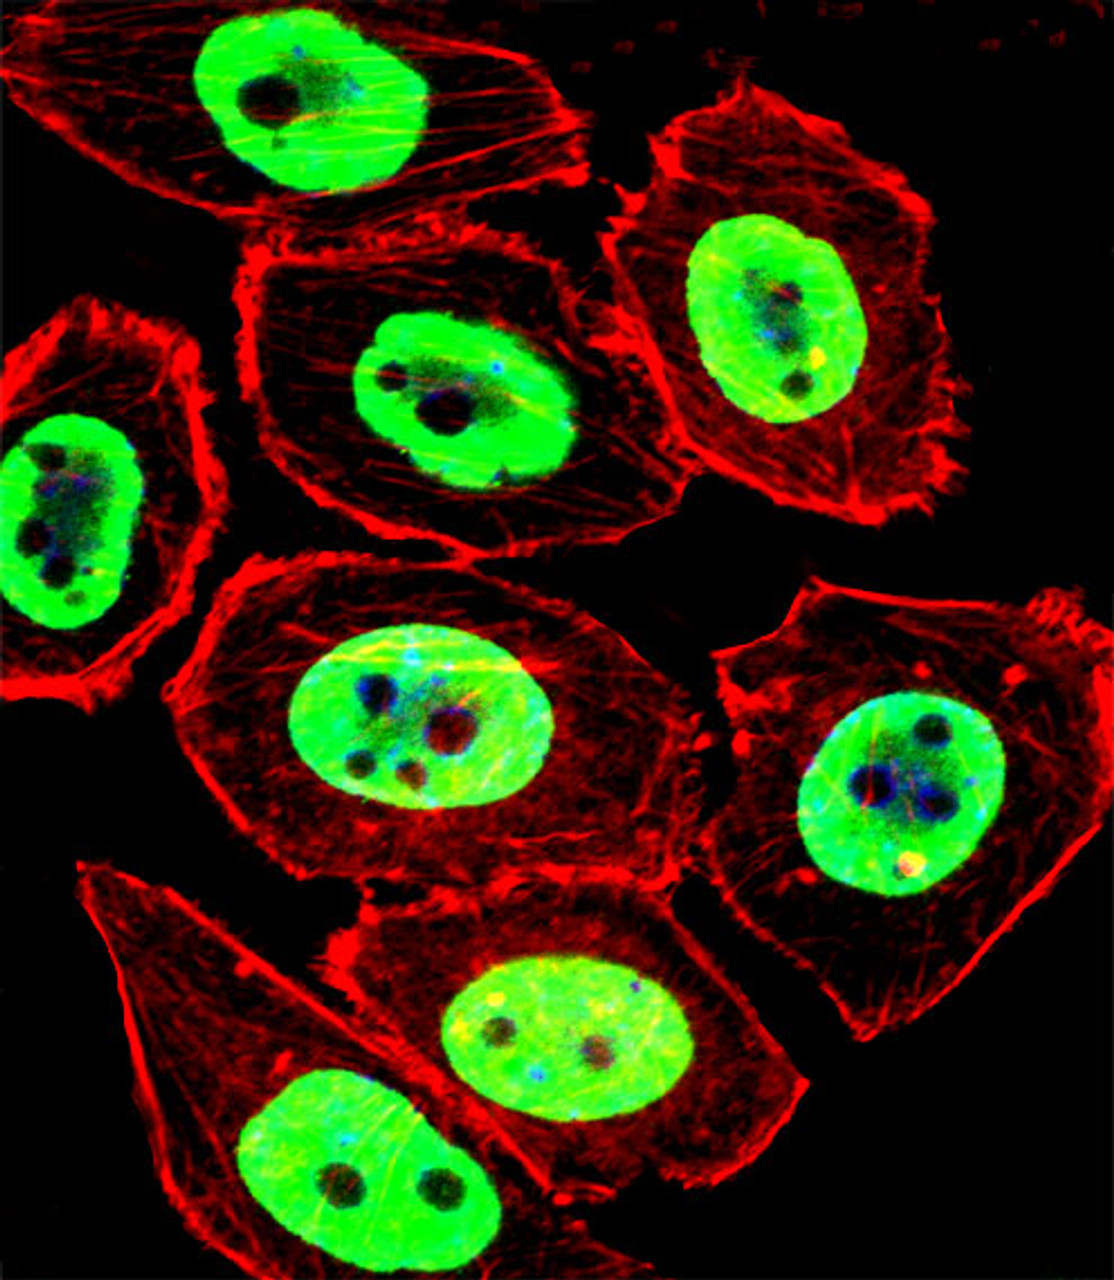 Fluorescent confocal image of U251 cell stained with EWSR1 Antibody .U251 cells were fixed with 4% PFA (20 min) , permeabilized with Triton X-100 (0.1%, 10 min) , then incubated with EWSR1 primary antibody (1:25) . For secondary antibody, Alexa Fluor 488 conjugated donkey anti-rabbit antibody (green) was used (1:400) .Cytoplasmic actin was counterstained with Alexa Fluor 555 (red) conjugated Phalloidin (7units/ml) . Nuclei were counterstained with DAPI (blue) (10 ug/ml, 10 min) .EWSR1 immunoreactivity is localized to Nucleus significantly.